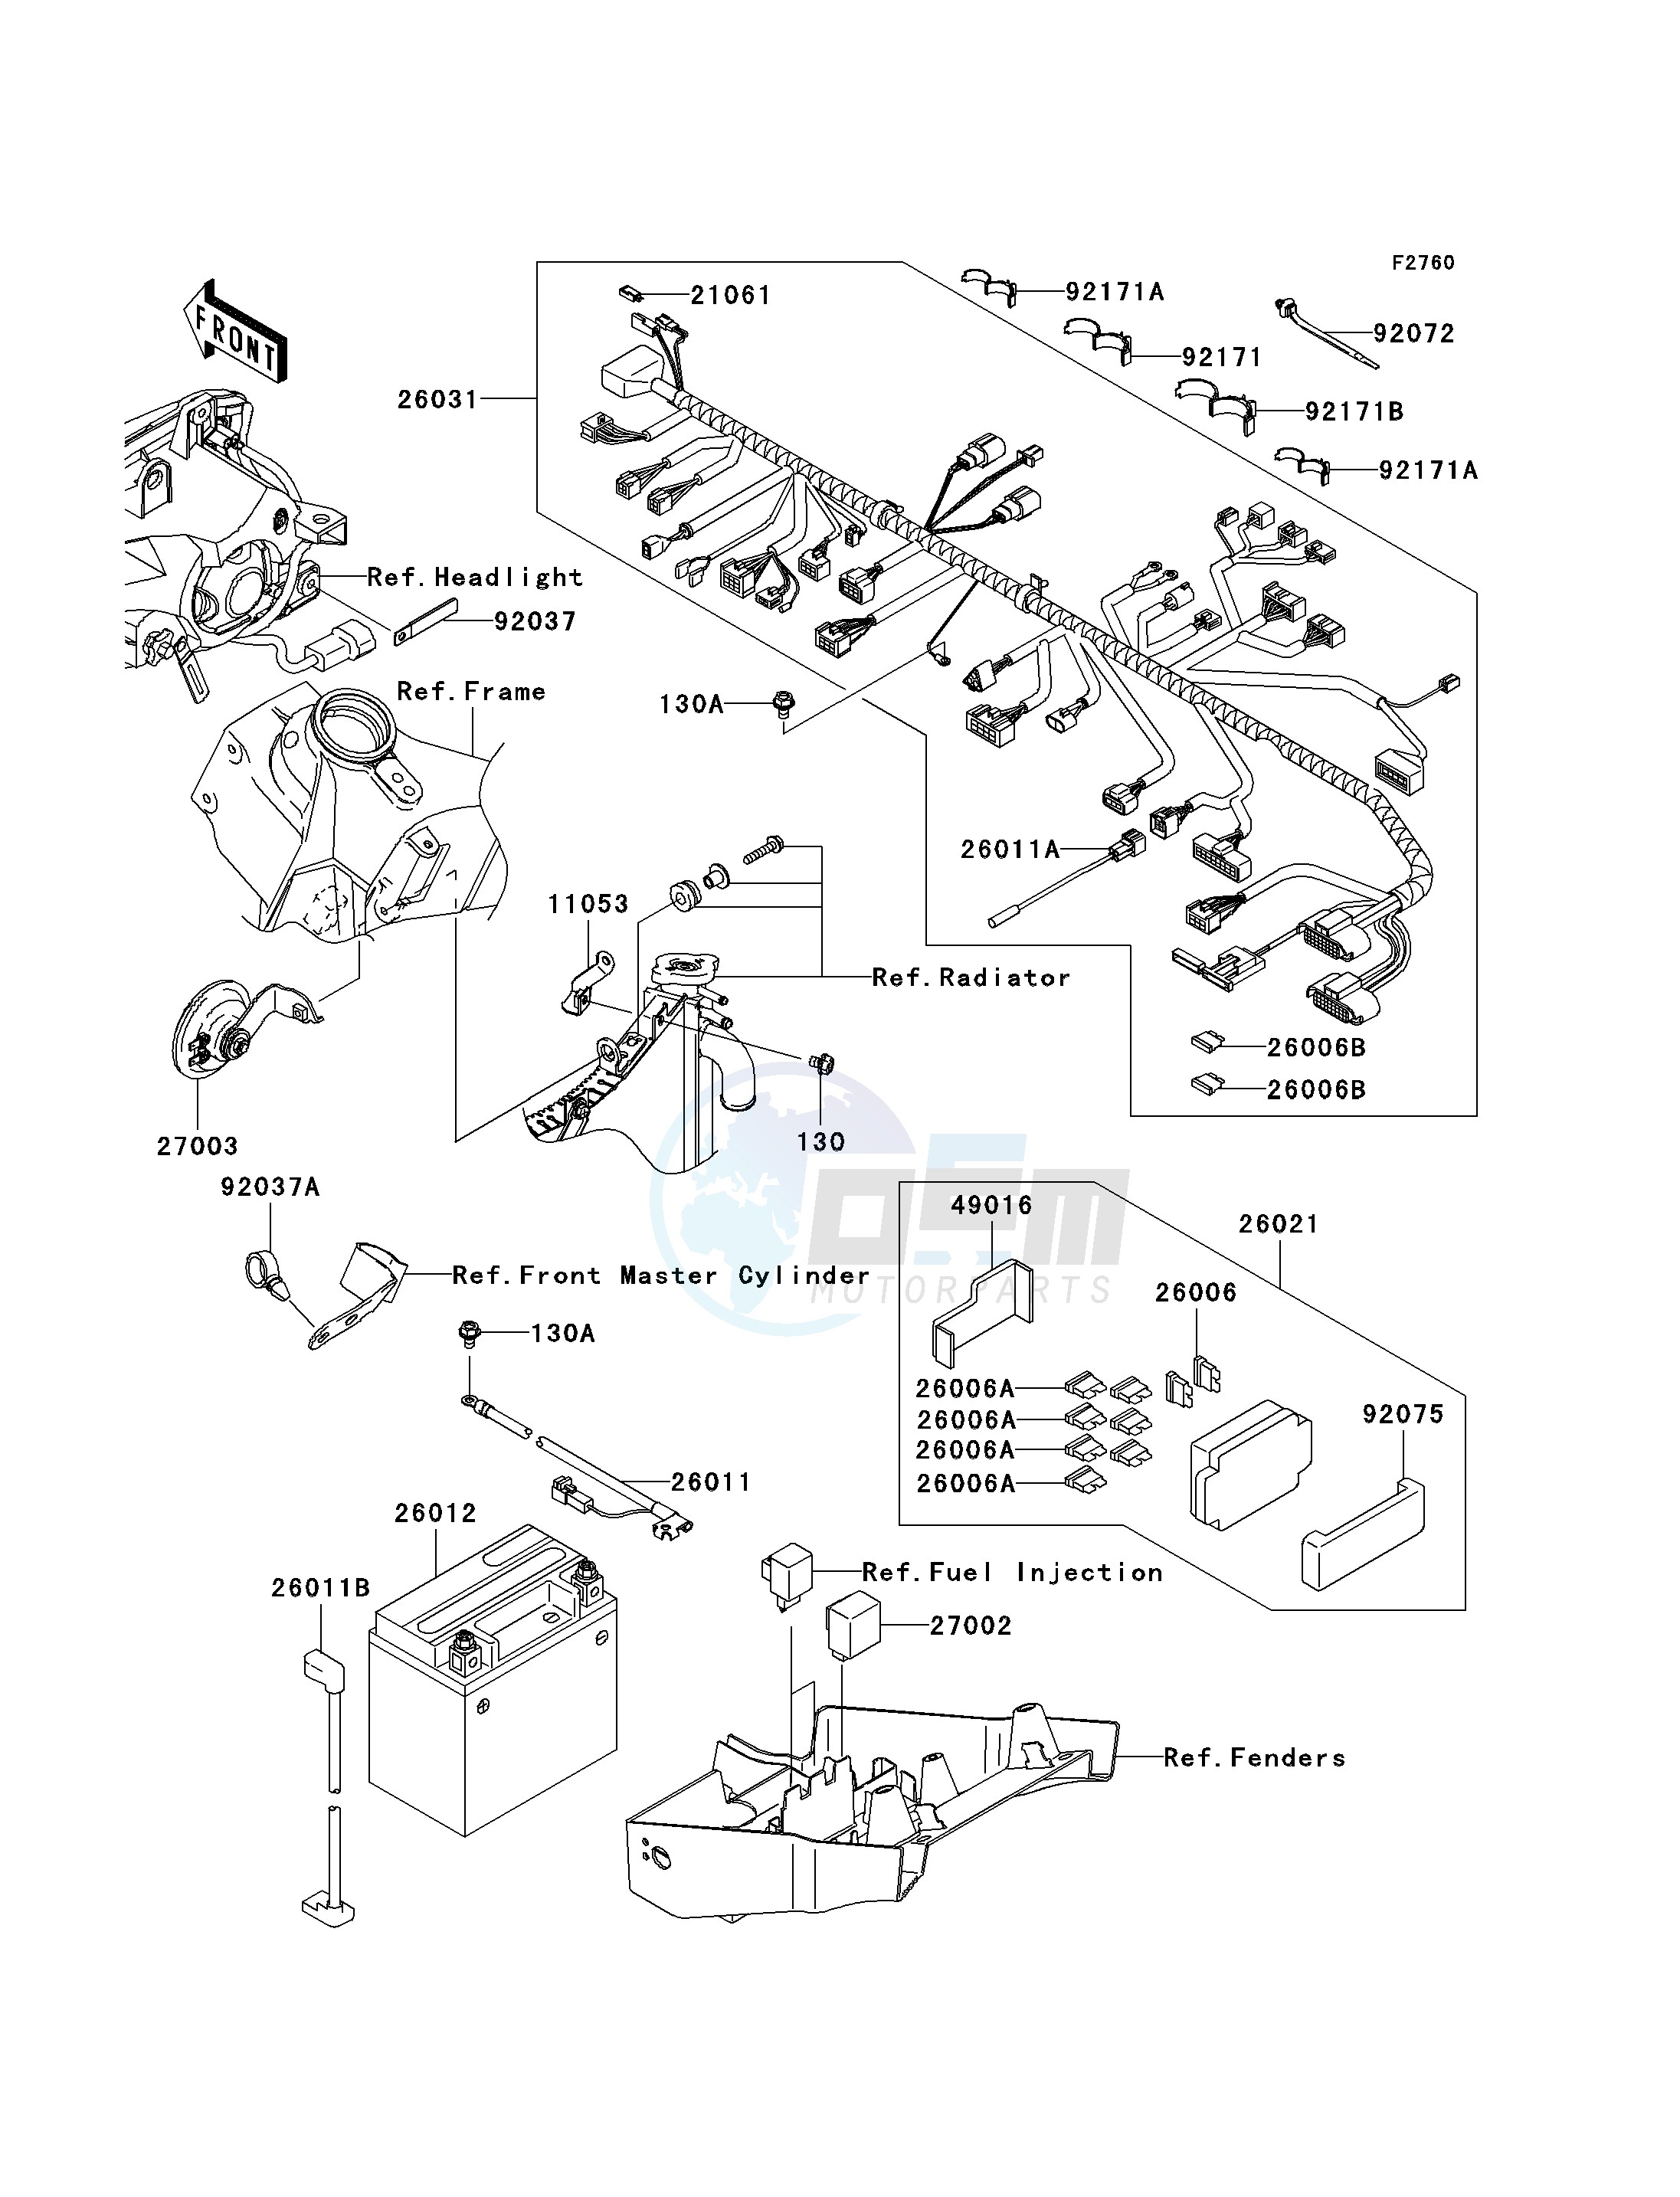 CHASSIS ELECTRICAL EQUIPMENT image